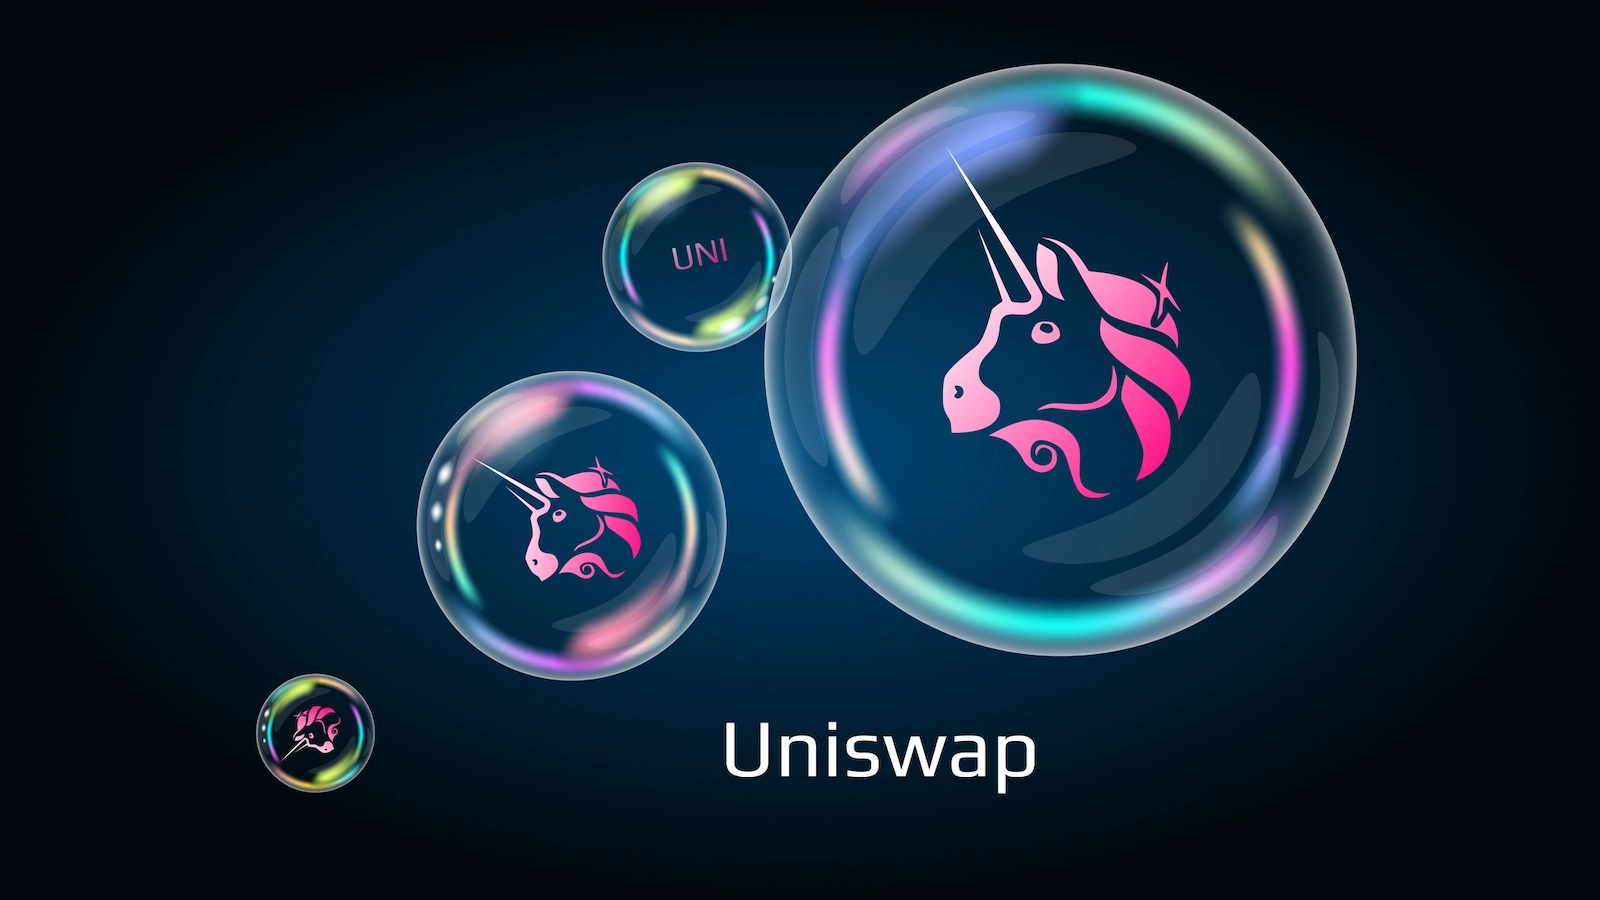 Uniswap version V4 got into a controversy regarding the firm's licensing choice